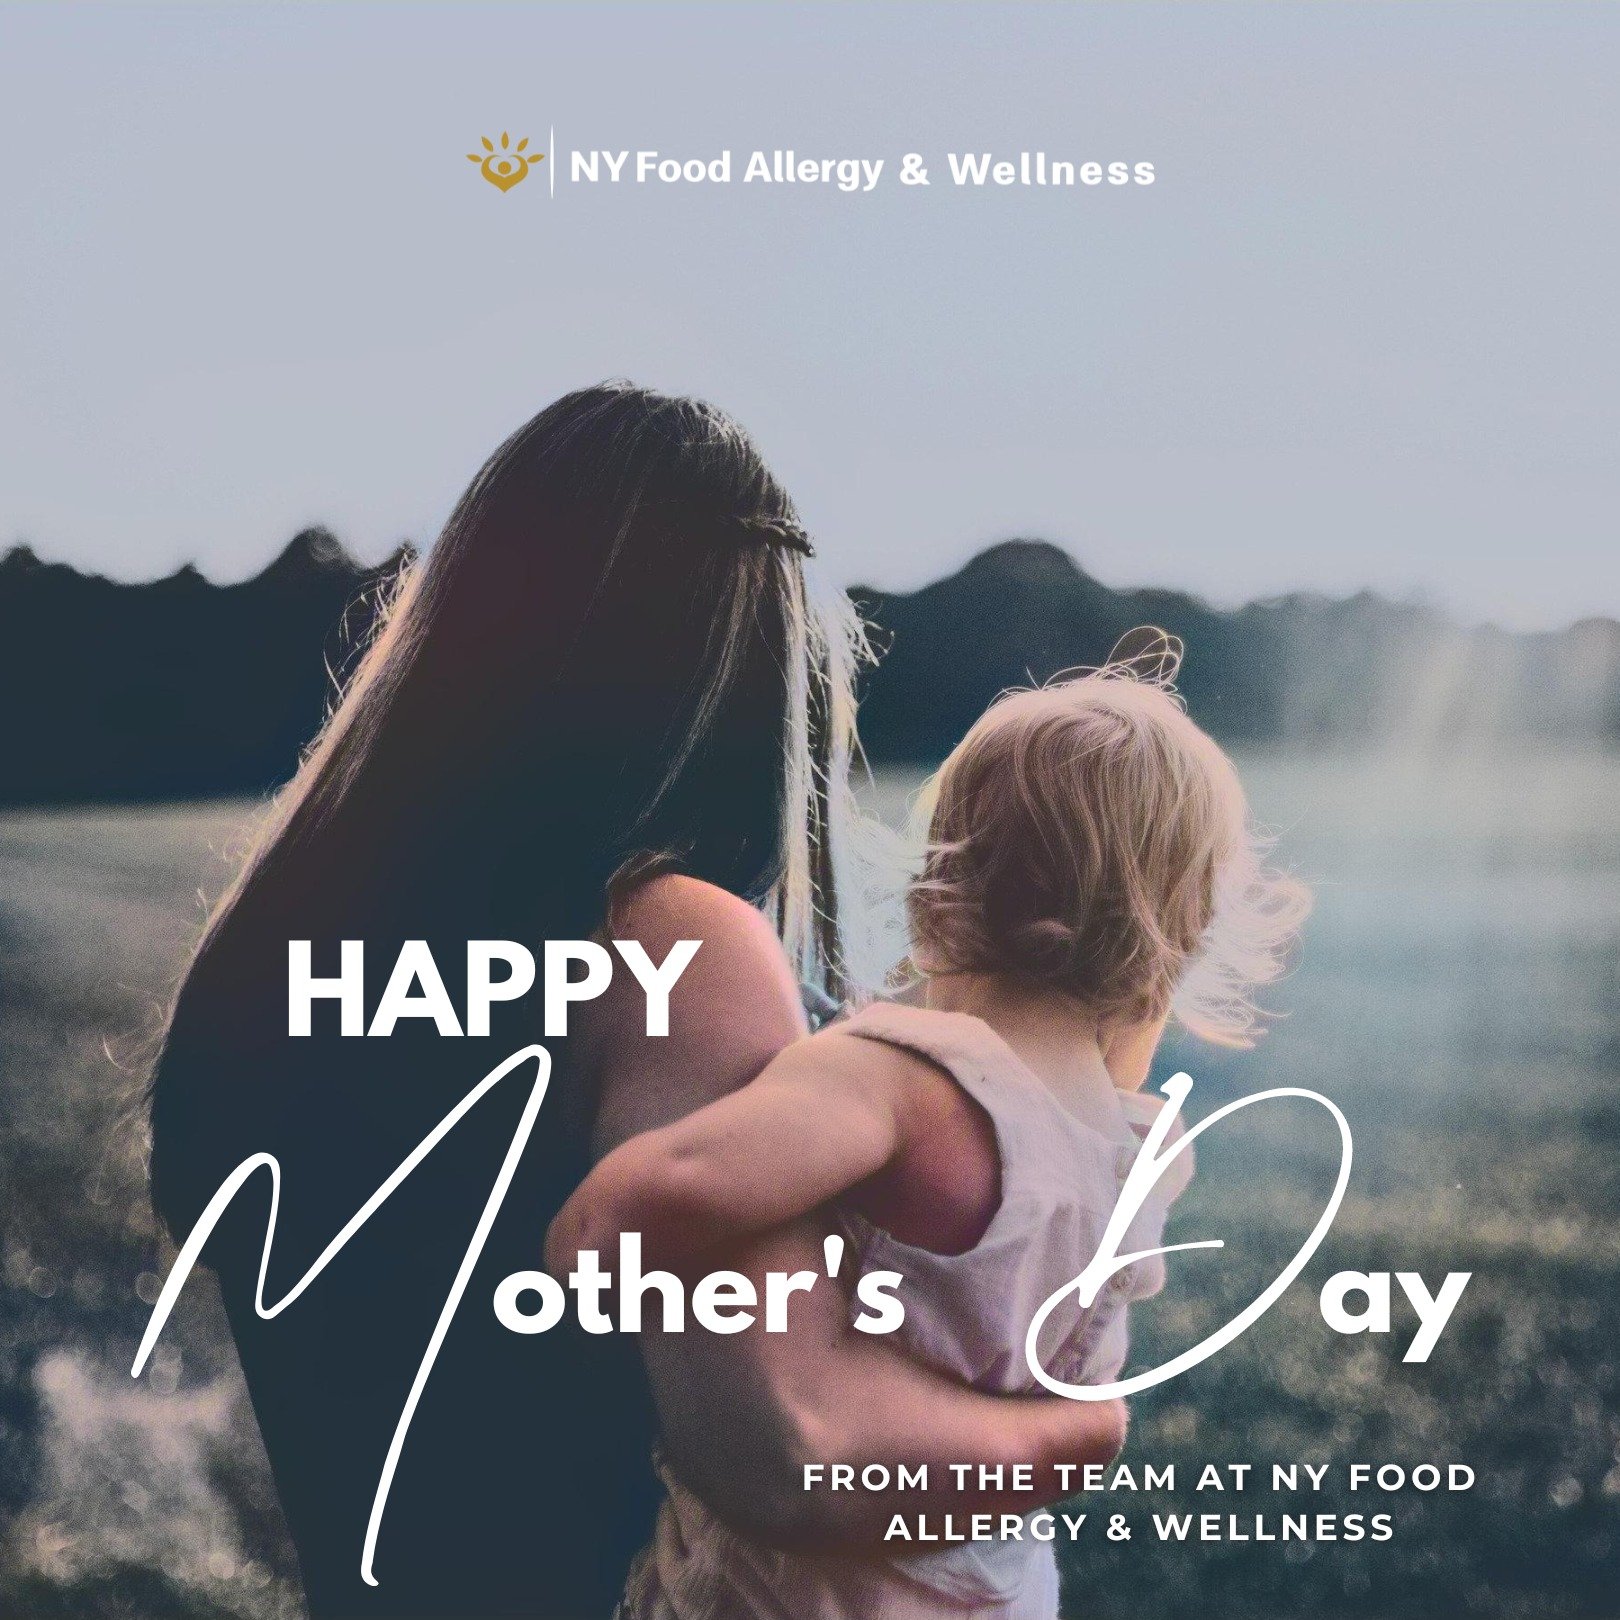 Wishing all the incredible moms a very Happy Mother&rsquo;s Day! 💐✨ May your day be filled with love, laughter, and cherished moments.

#FoodAllergyMomsDay #foodallergymoms #mothersday #mom #FoodAllergy #food #foodallergies #foodallergytreatment #fo